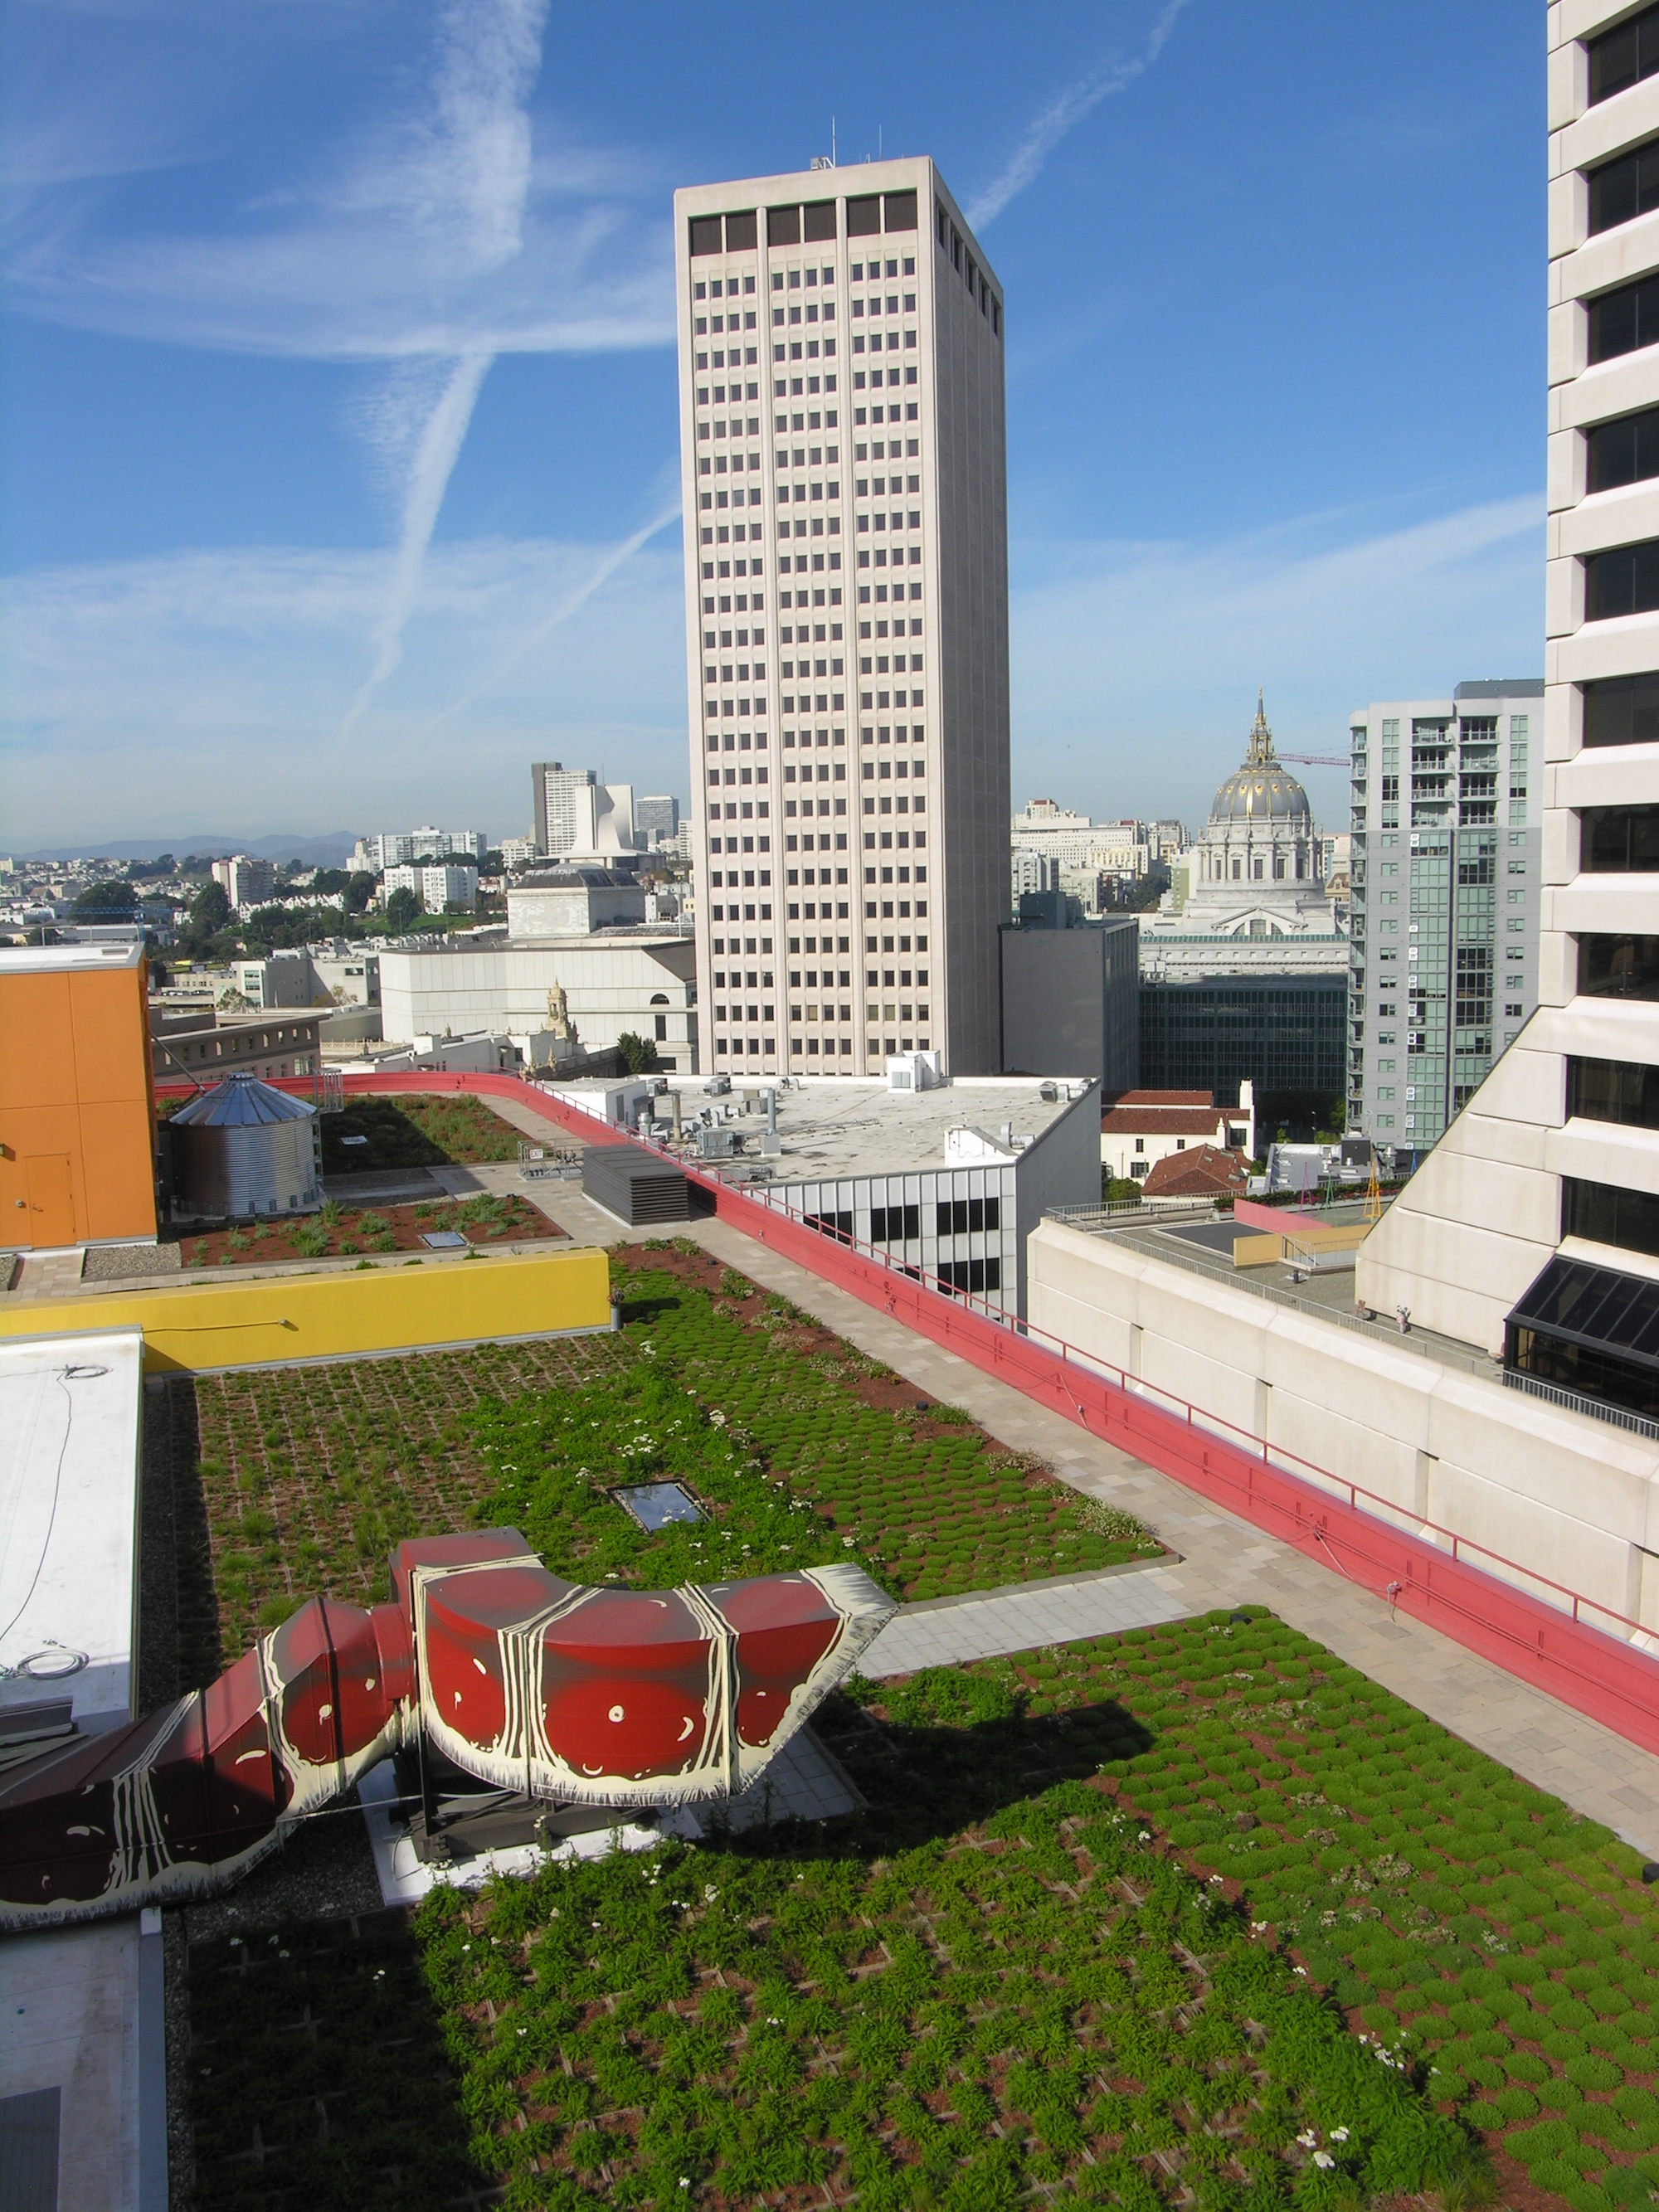 Green Roof at 1 South Van Ness Avenue